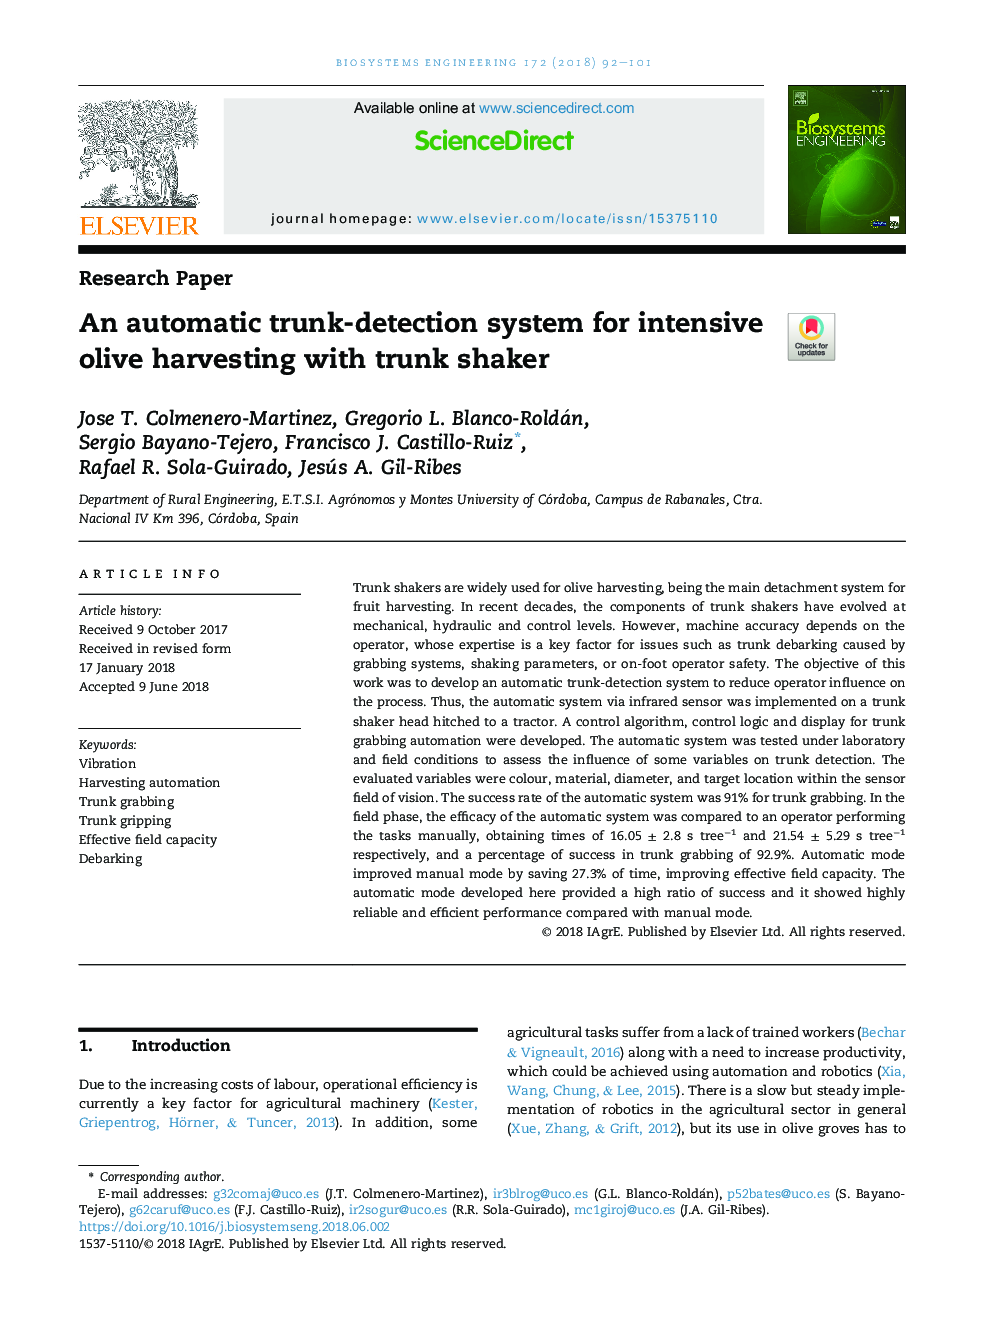 An automatic trunk-detection system for intensive olive harvesting with trunk shaker